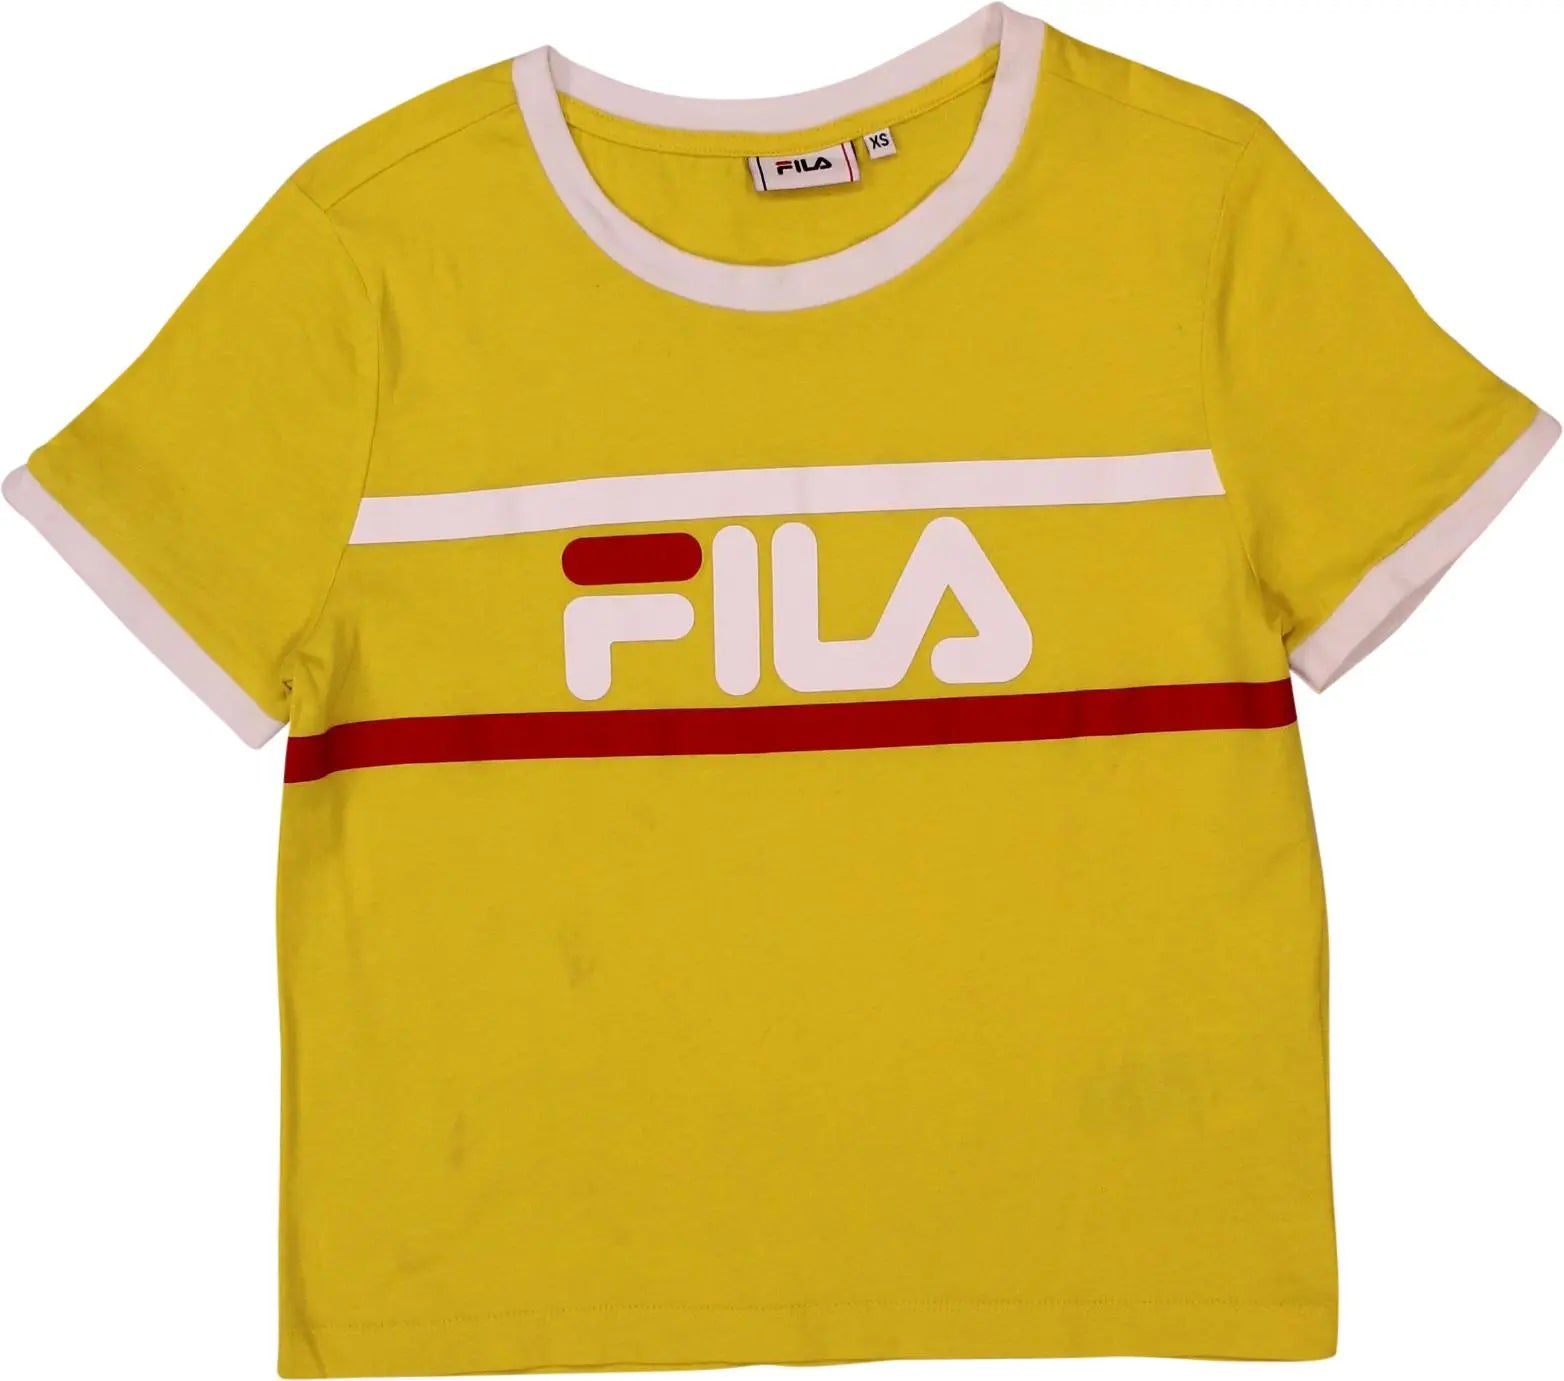 Fila - Yellow T-shirt by Fila- ThriftTale.com - Vintage and second handclothing